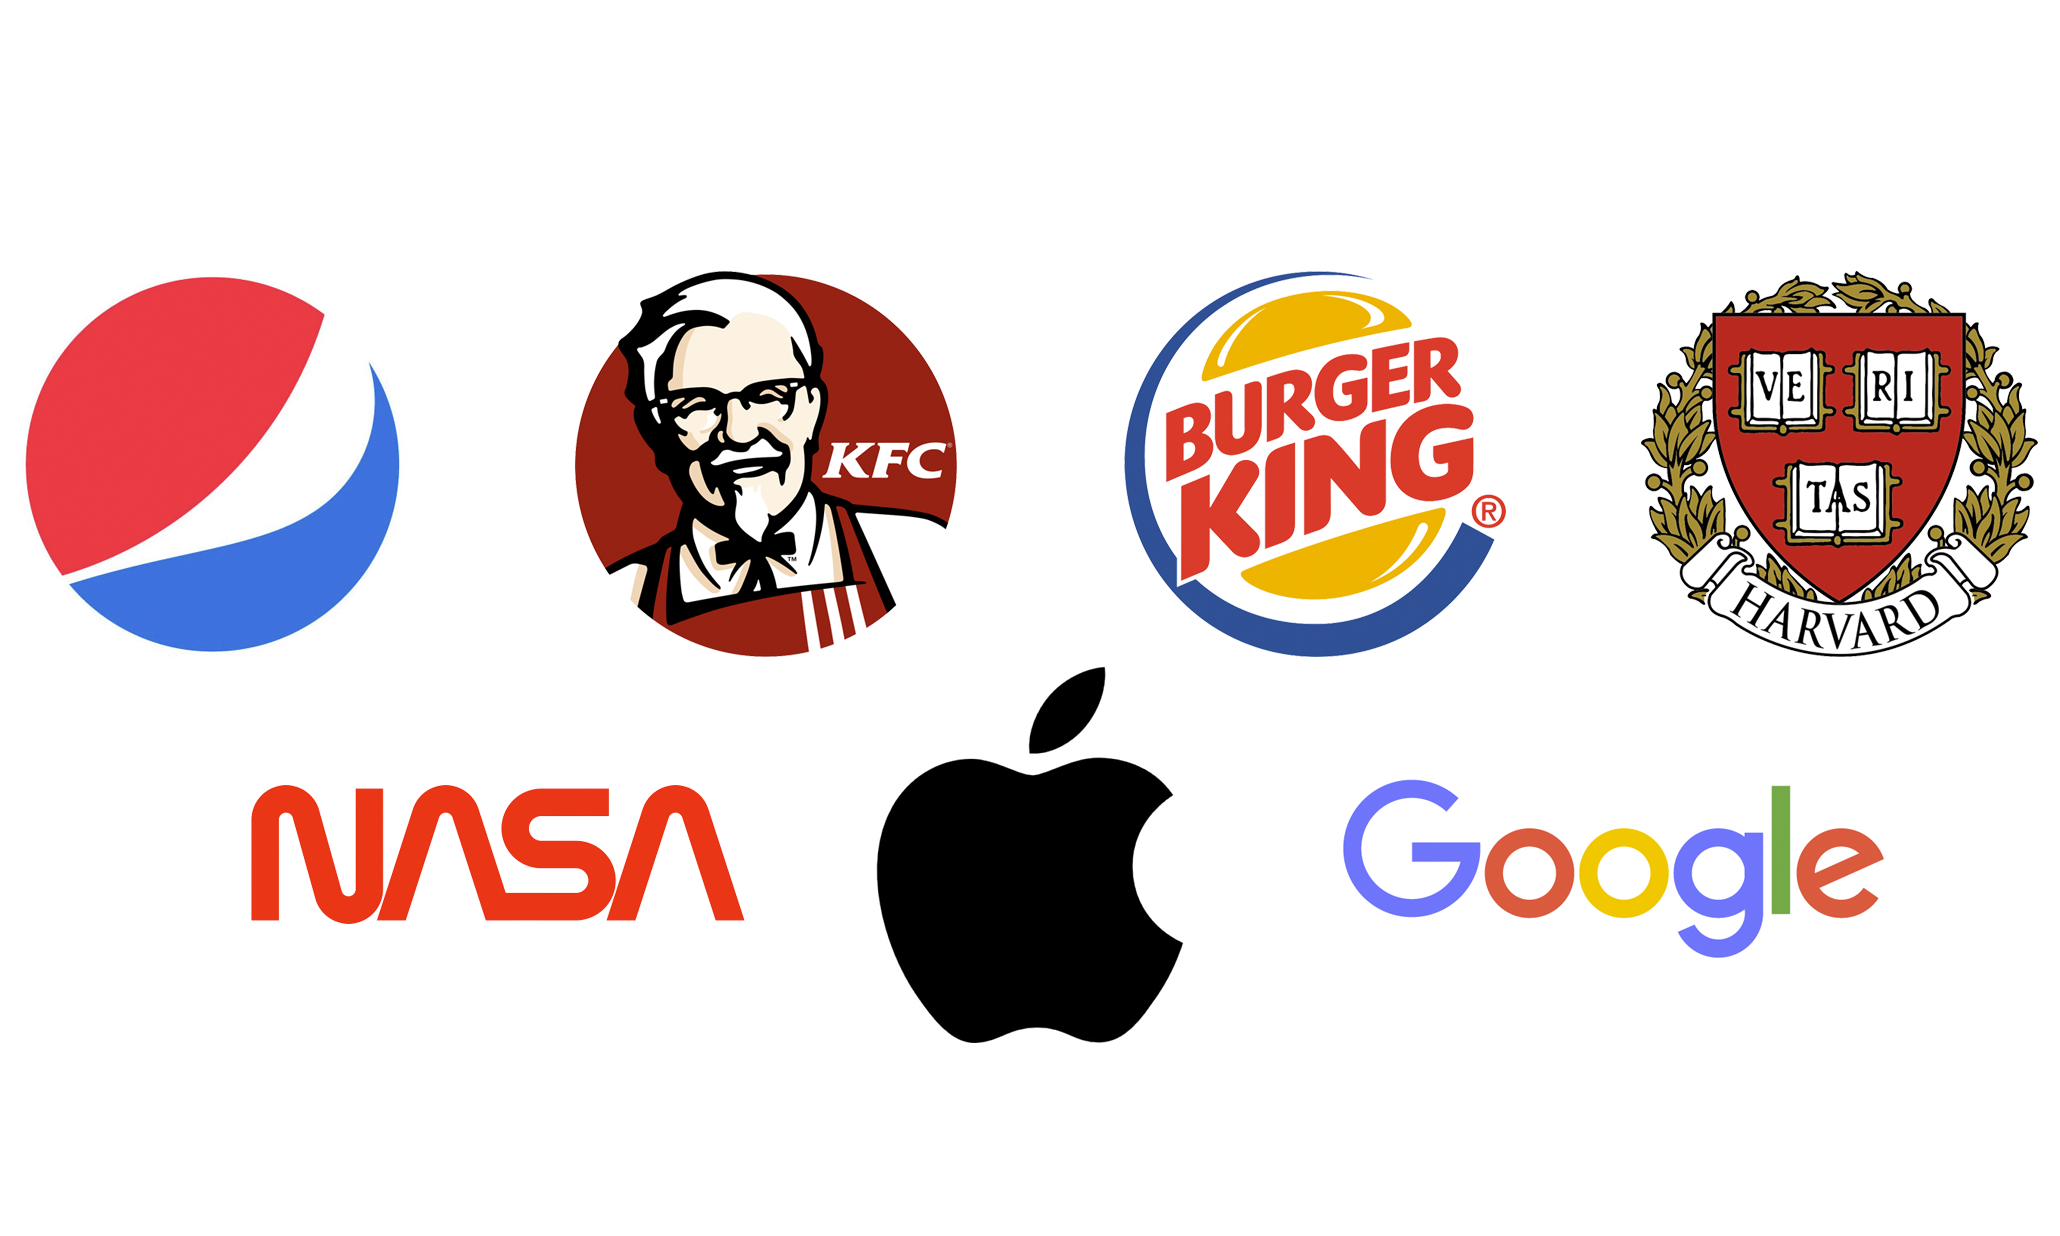 How to Use Abstraction Effectively in Logo Design